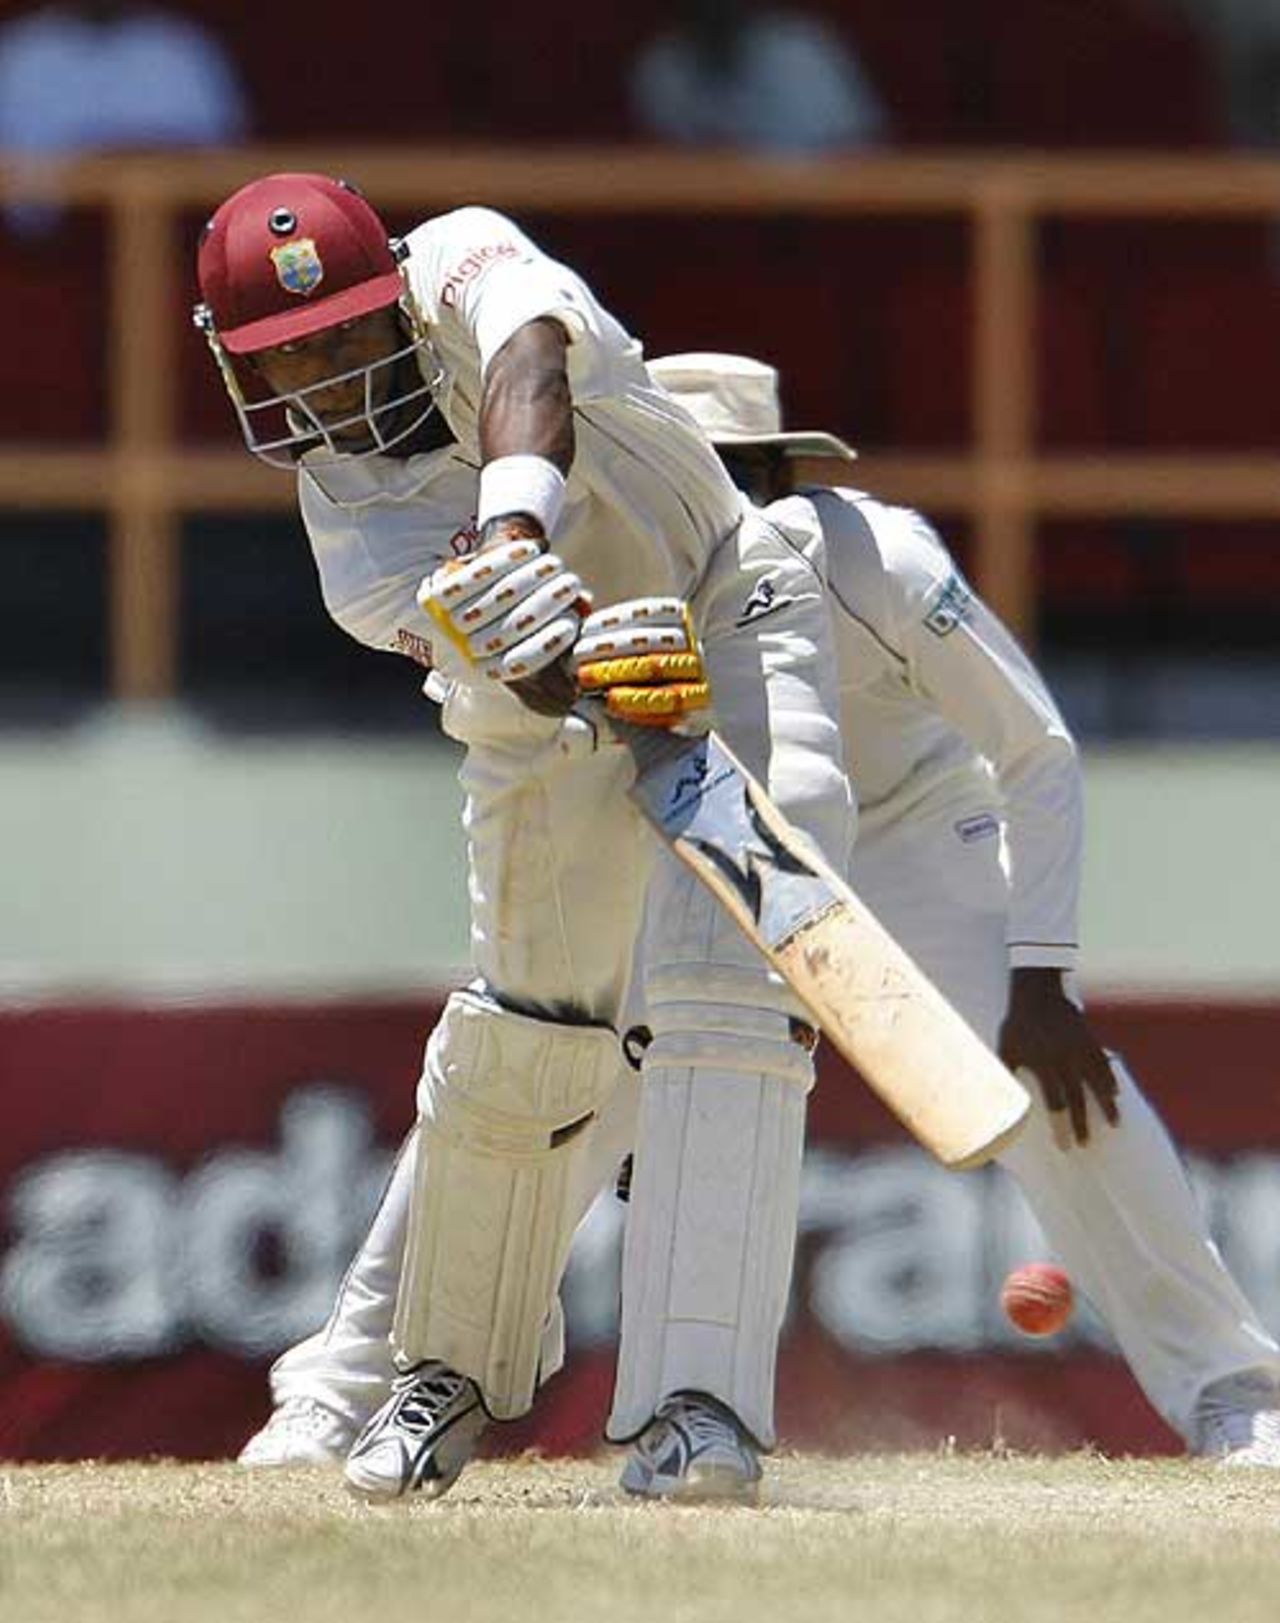 Dwayne Bravo's 83 defied Sri Lanka for most of the first session, West Indies v Sri Lanka, 1st Test, Guyana, 5th day, March 26, 2008